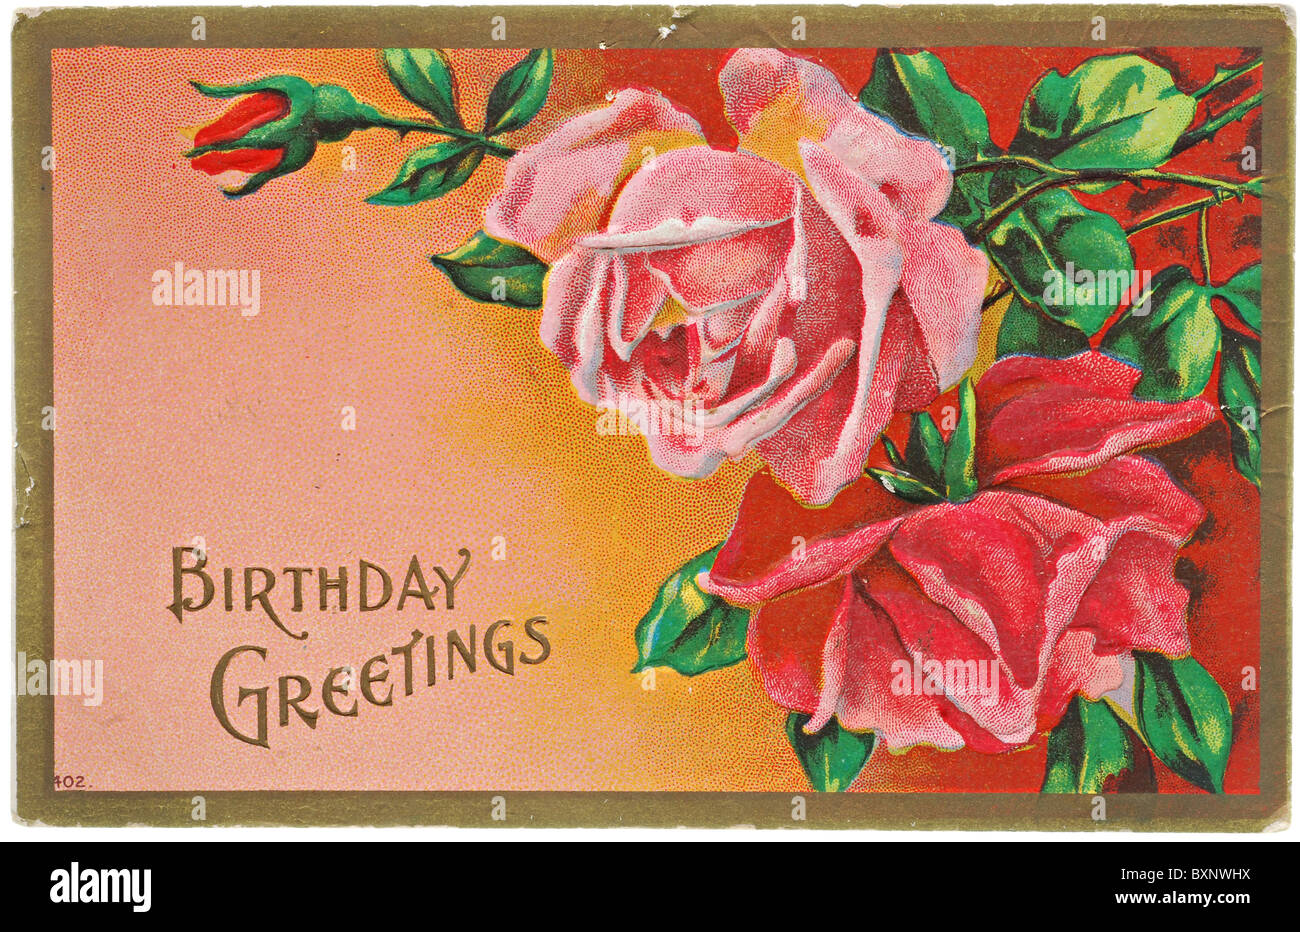 Vintage birthday greetings postcard with red roses Stock Photo